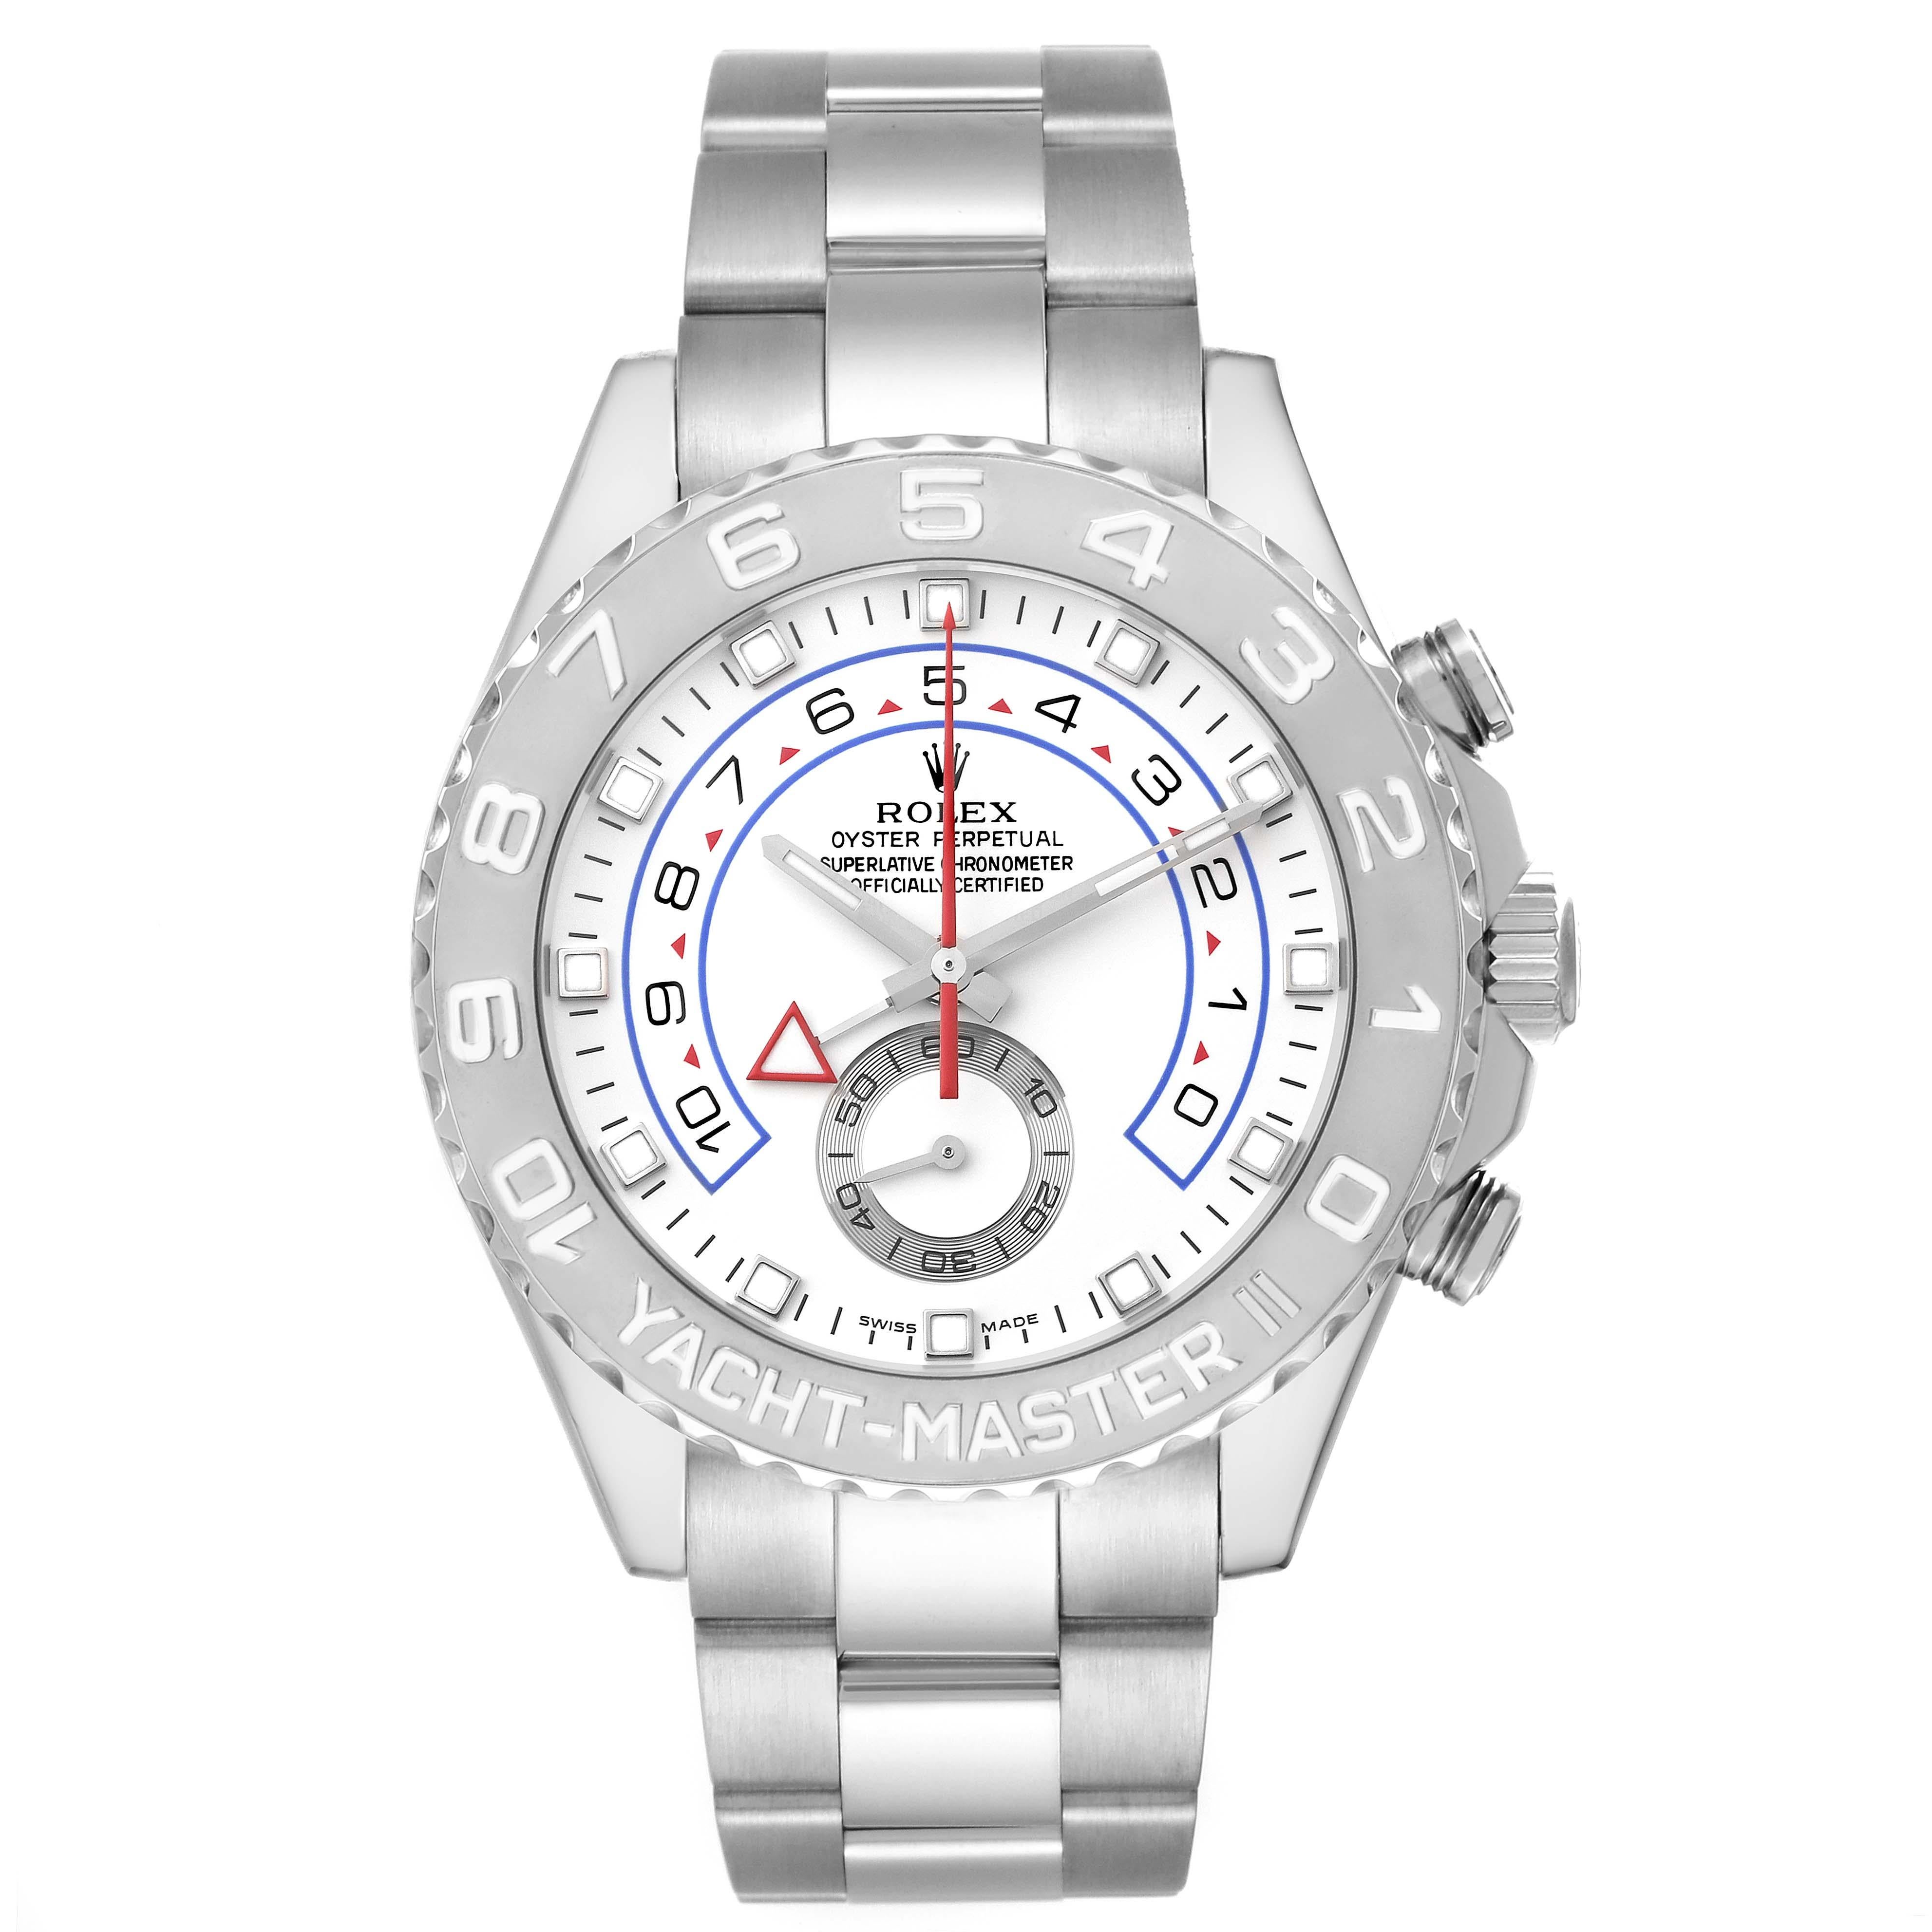 Rolex Yachtmaster II Regatta White Gold Platinum Mens Watch 116689. Officially certified chronometer self-winding movement. 18K white gold case 44.0 mm in diameter. Screw down crown and caseback. Rolex logo on a crown. 90 degree rotating platinum